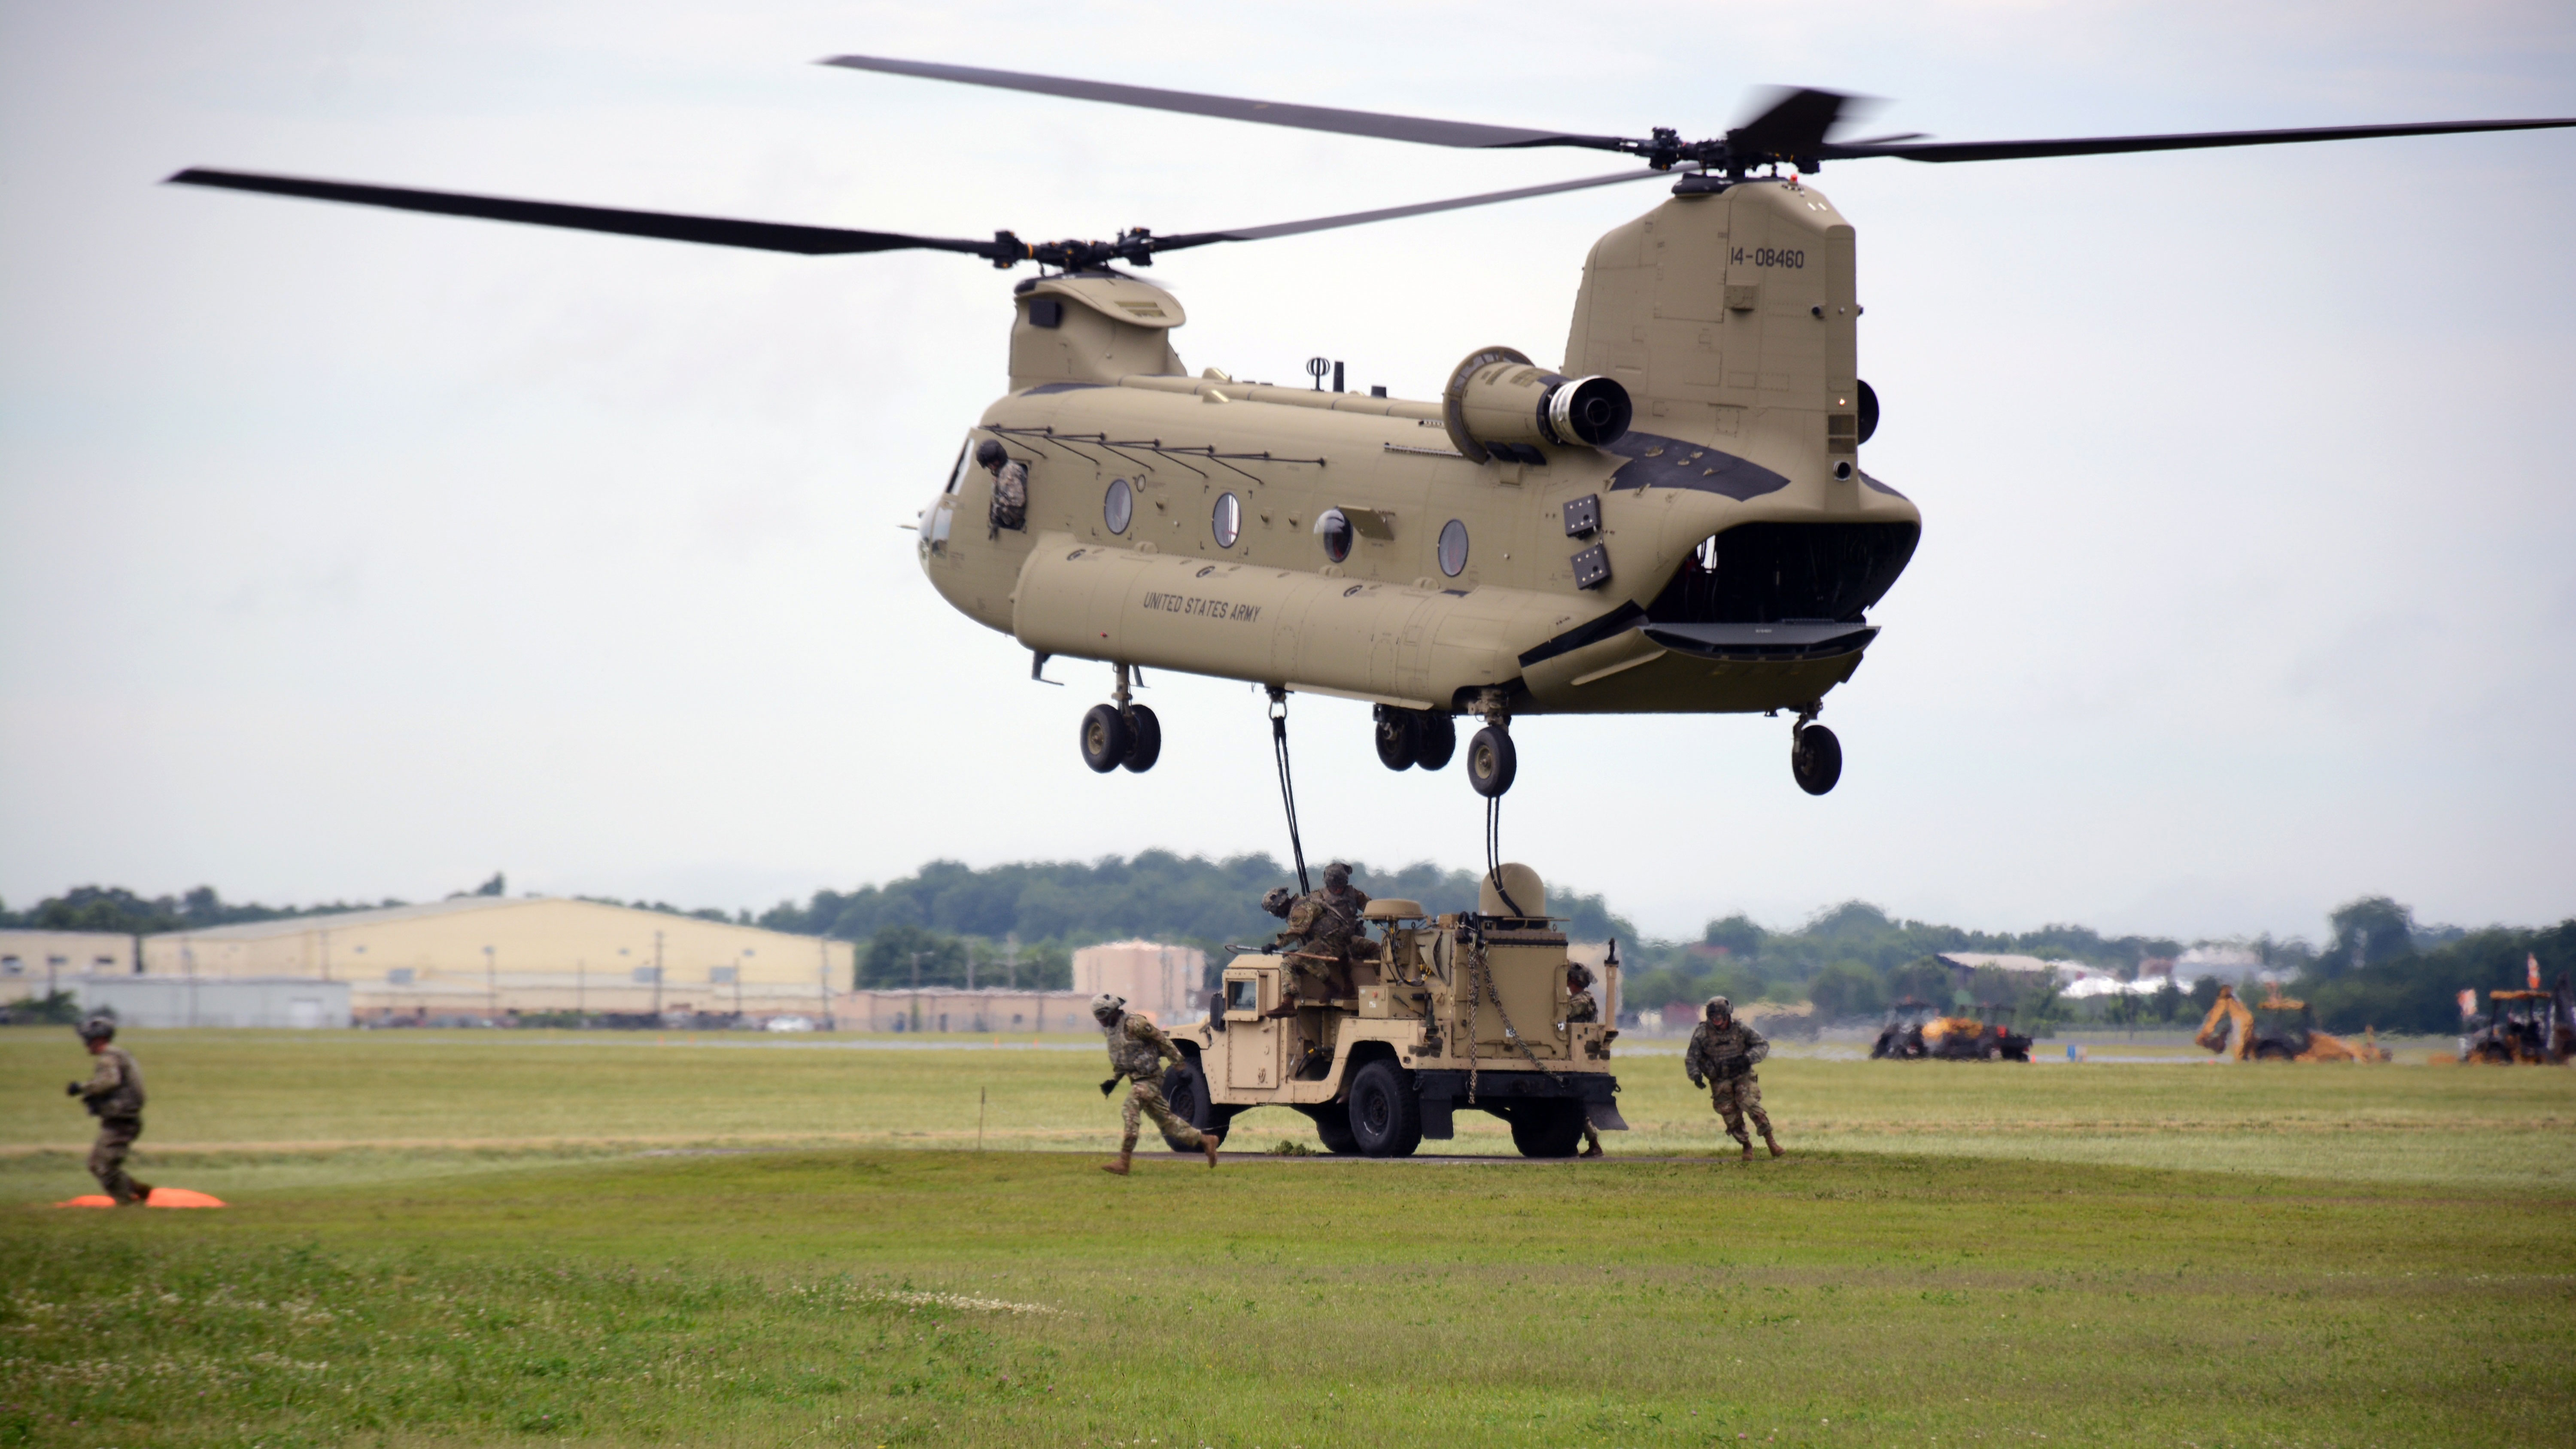 Soldiers from the 2nd Brigade Combat Team (BCT), 101st Airborne Division (Air Assault) move away from a CH-47 Chinook after successfully hanging the Tactical Communications Node-Light during a sling load exercise at Fort Campbell, Kentucky, in June 2017. The new systems can be sling-loaded from a helicopter or rolled onto a C130 aircraft, improving agility and operational flexibility and aiding Army efforts to deploy right-sized units across contested domains at every stage of operations. (U.S. Army photo by 1st Lt. Daniel Johnson, 2nd BCT, 101st Airborne Division Public Affairs)